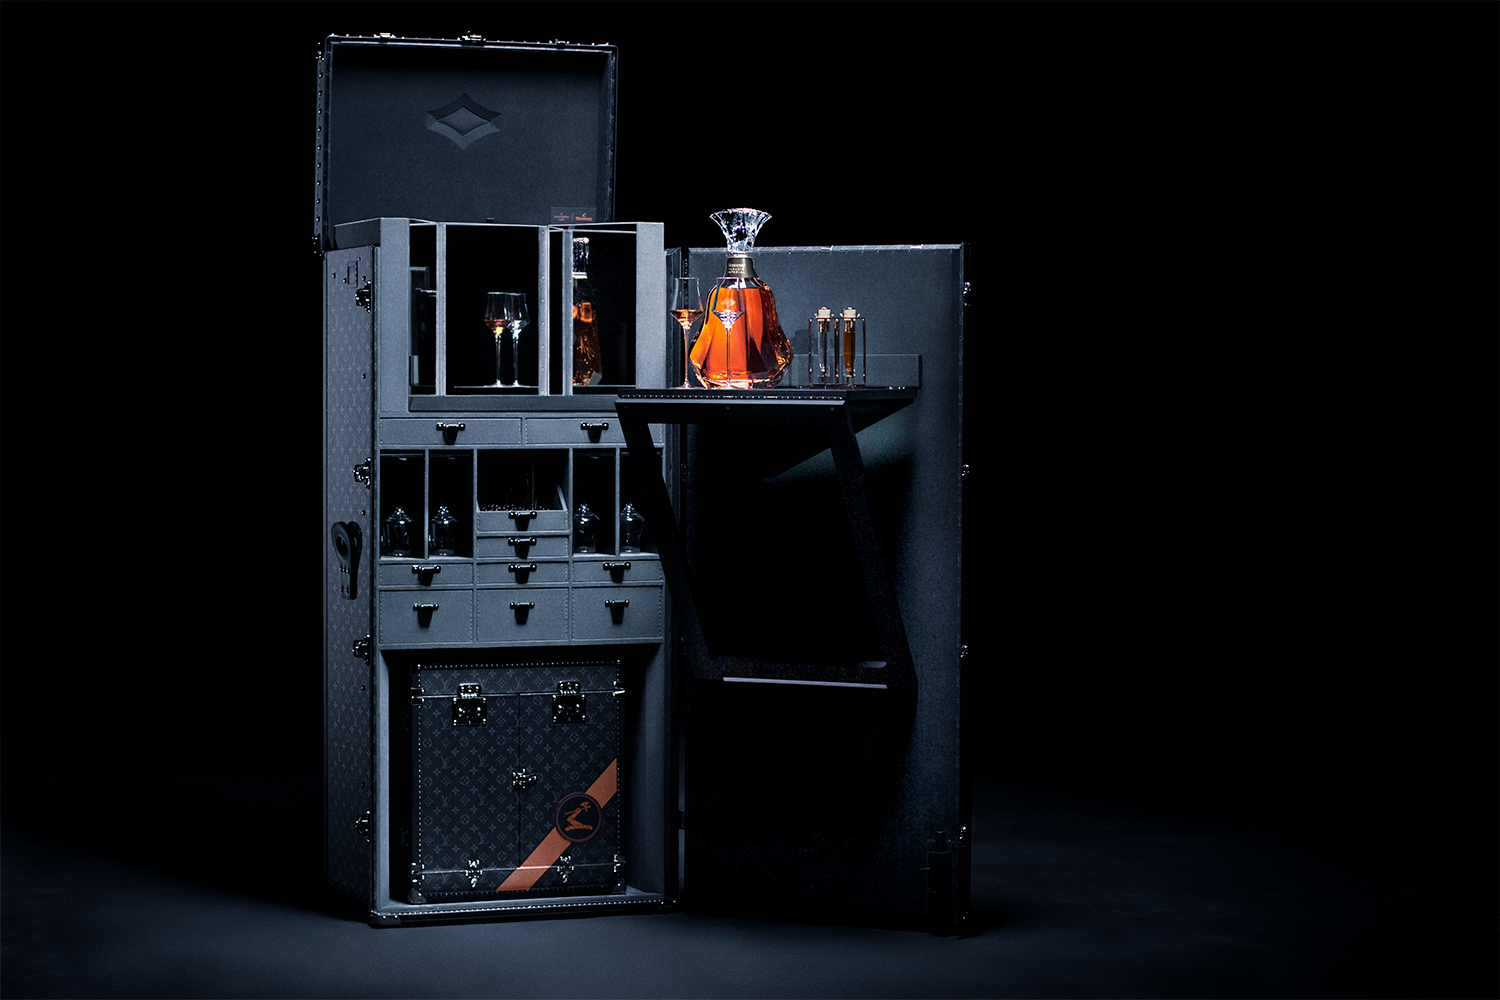 This $273,000 Louis Vuitton Trunk Doubles as a Bar Cart for Your